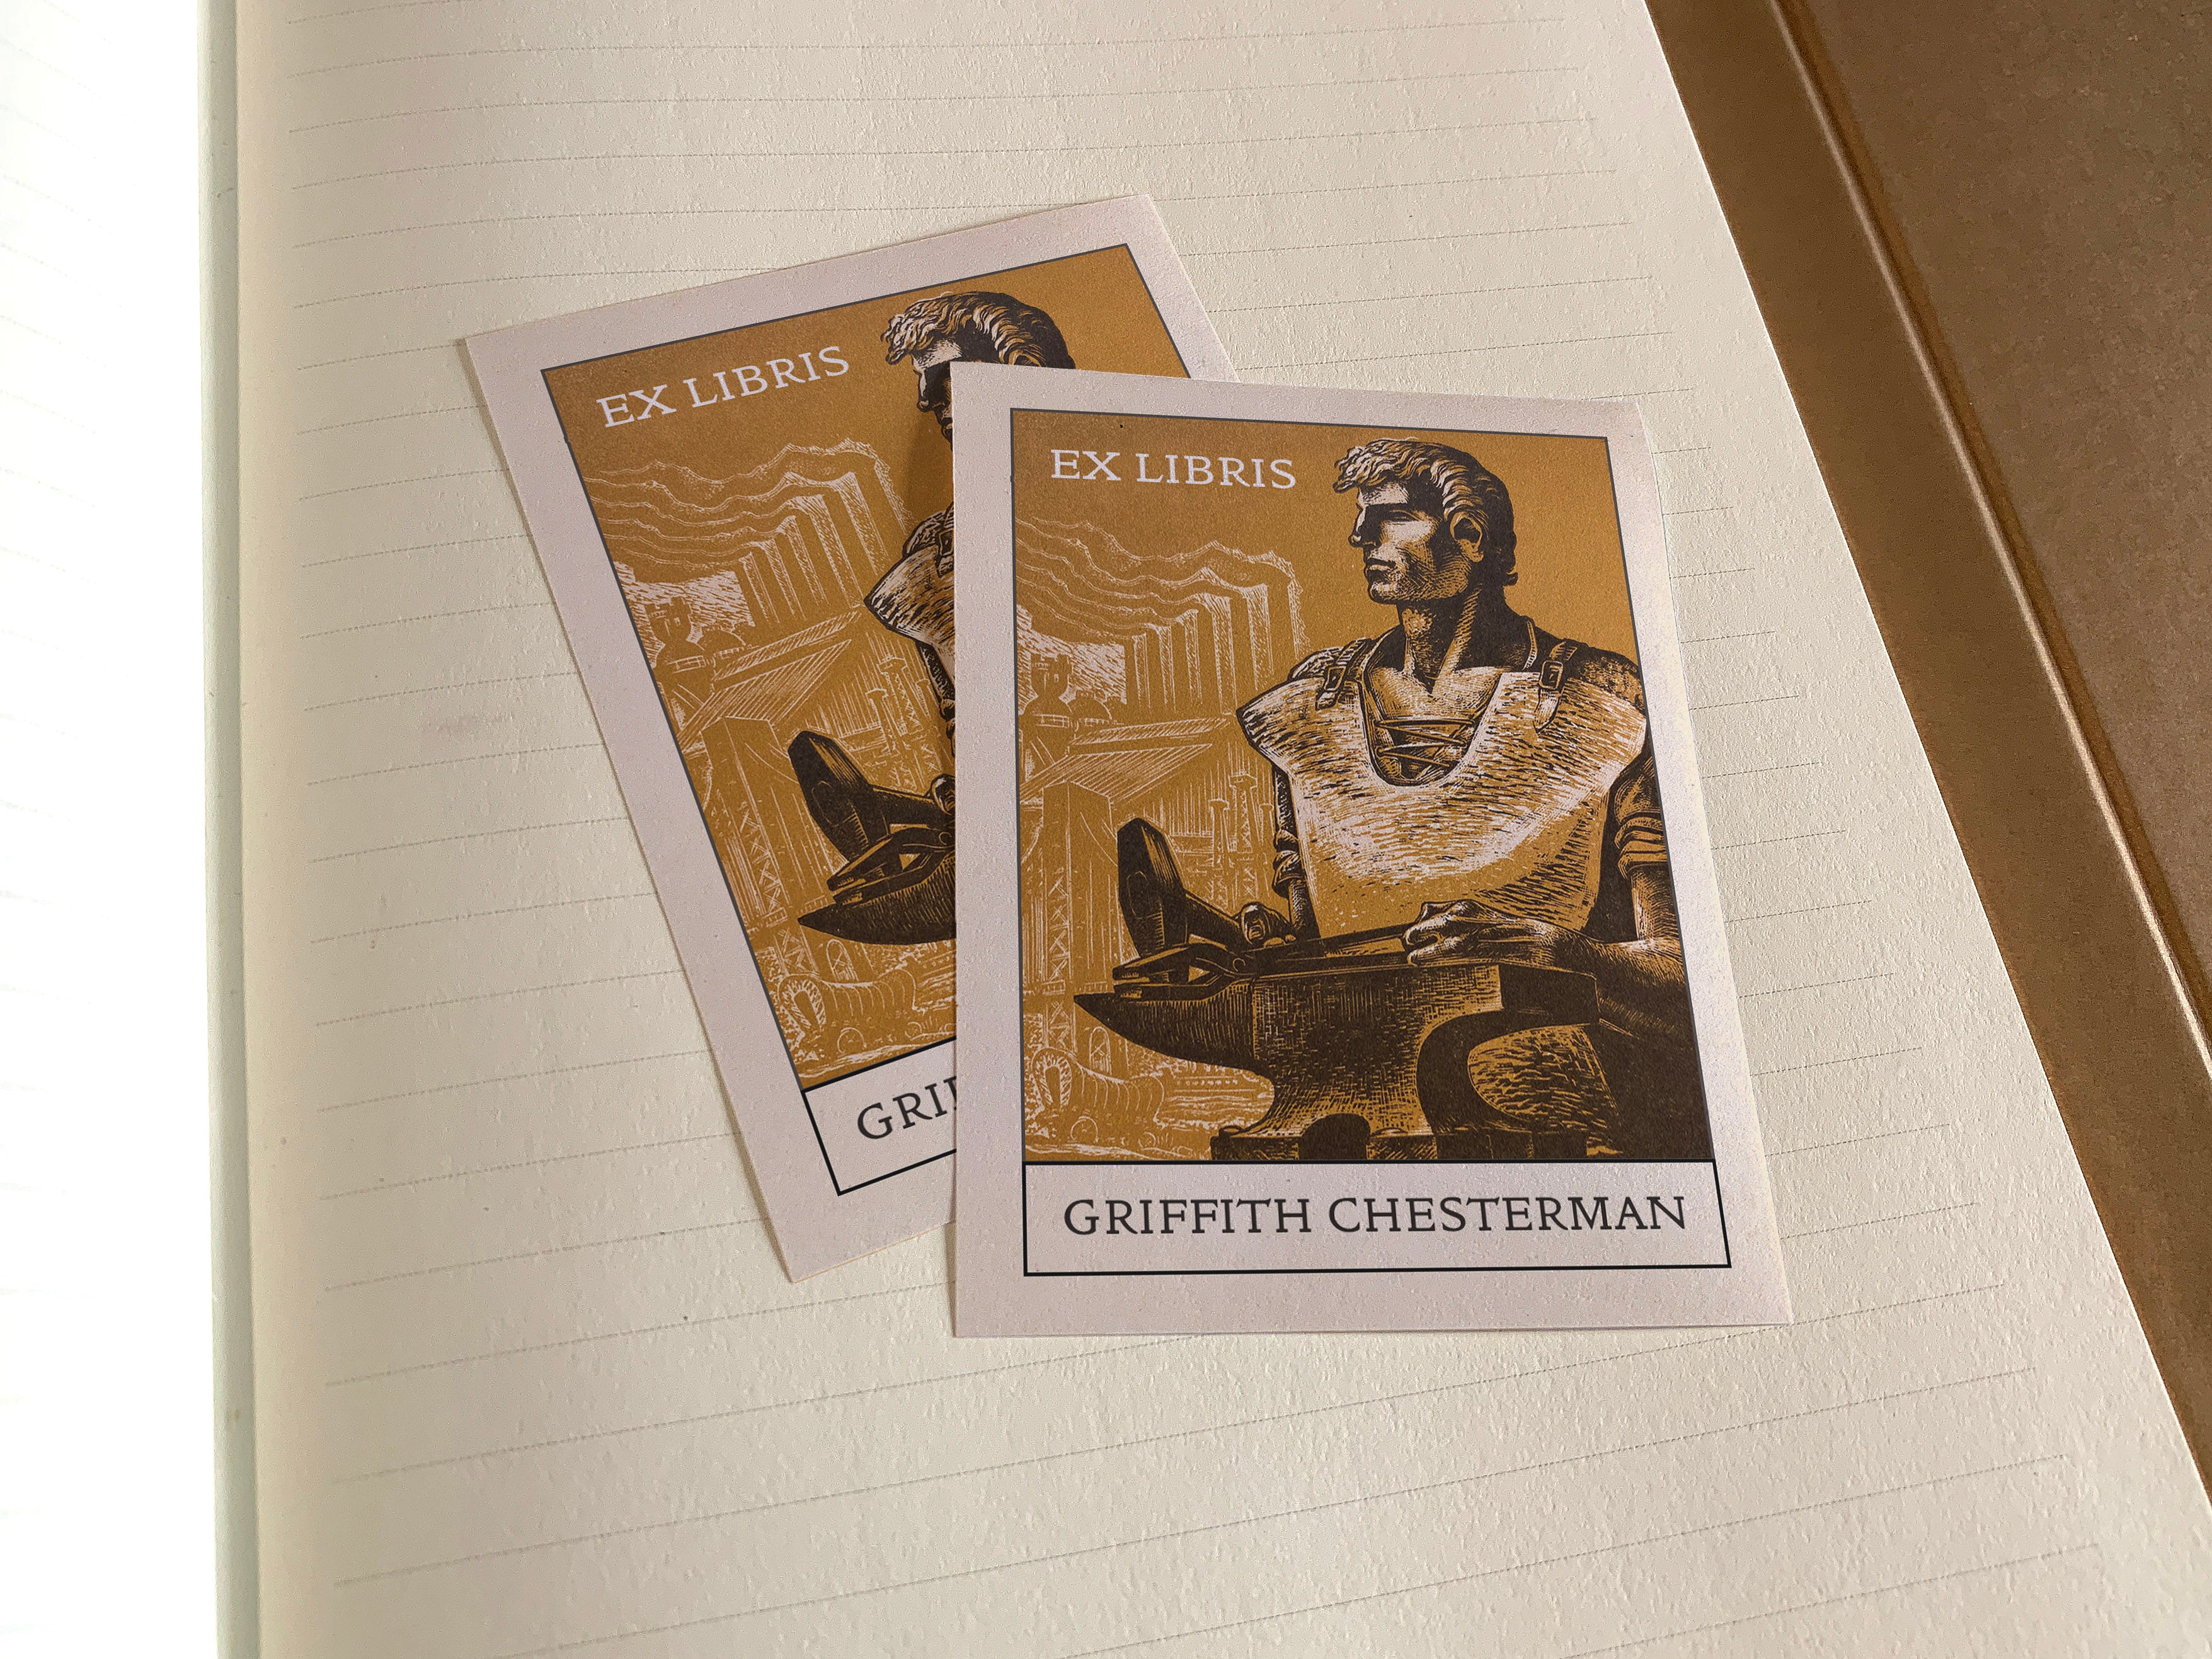 Modern Hephaestus, Personalized Ex-Libris Bookplates, Crafted on Traditional Gummed Paper, 3in x 4in, Set of 30